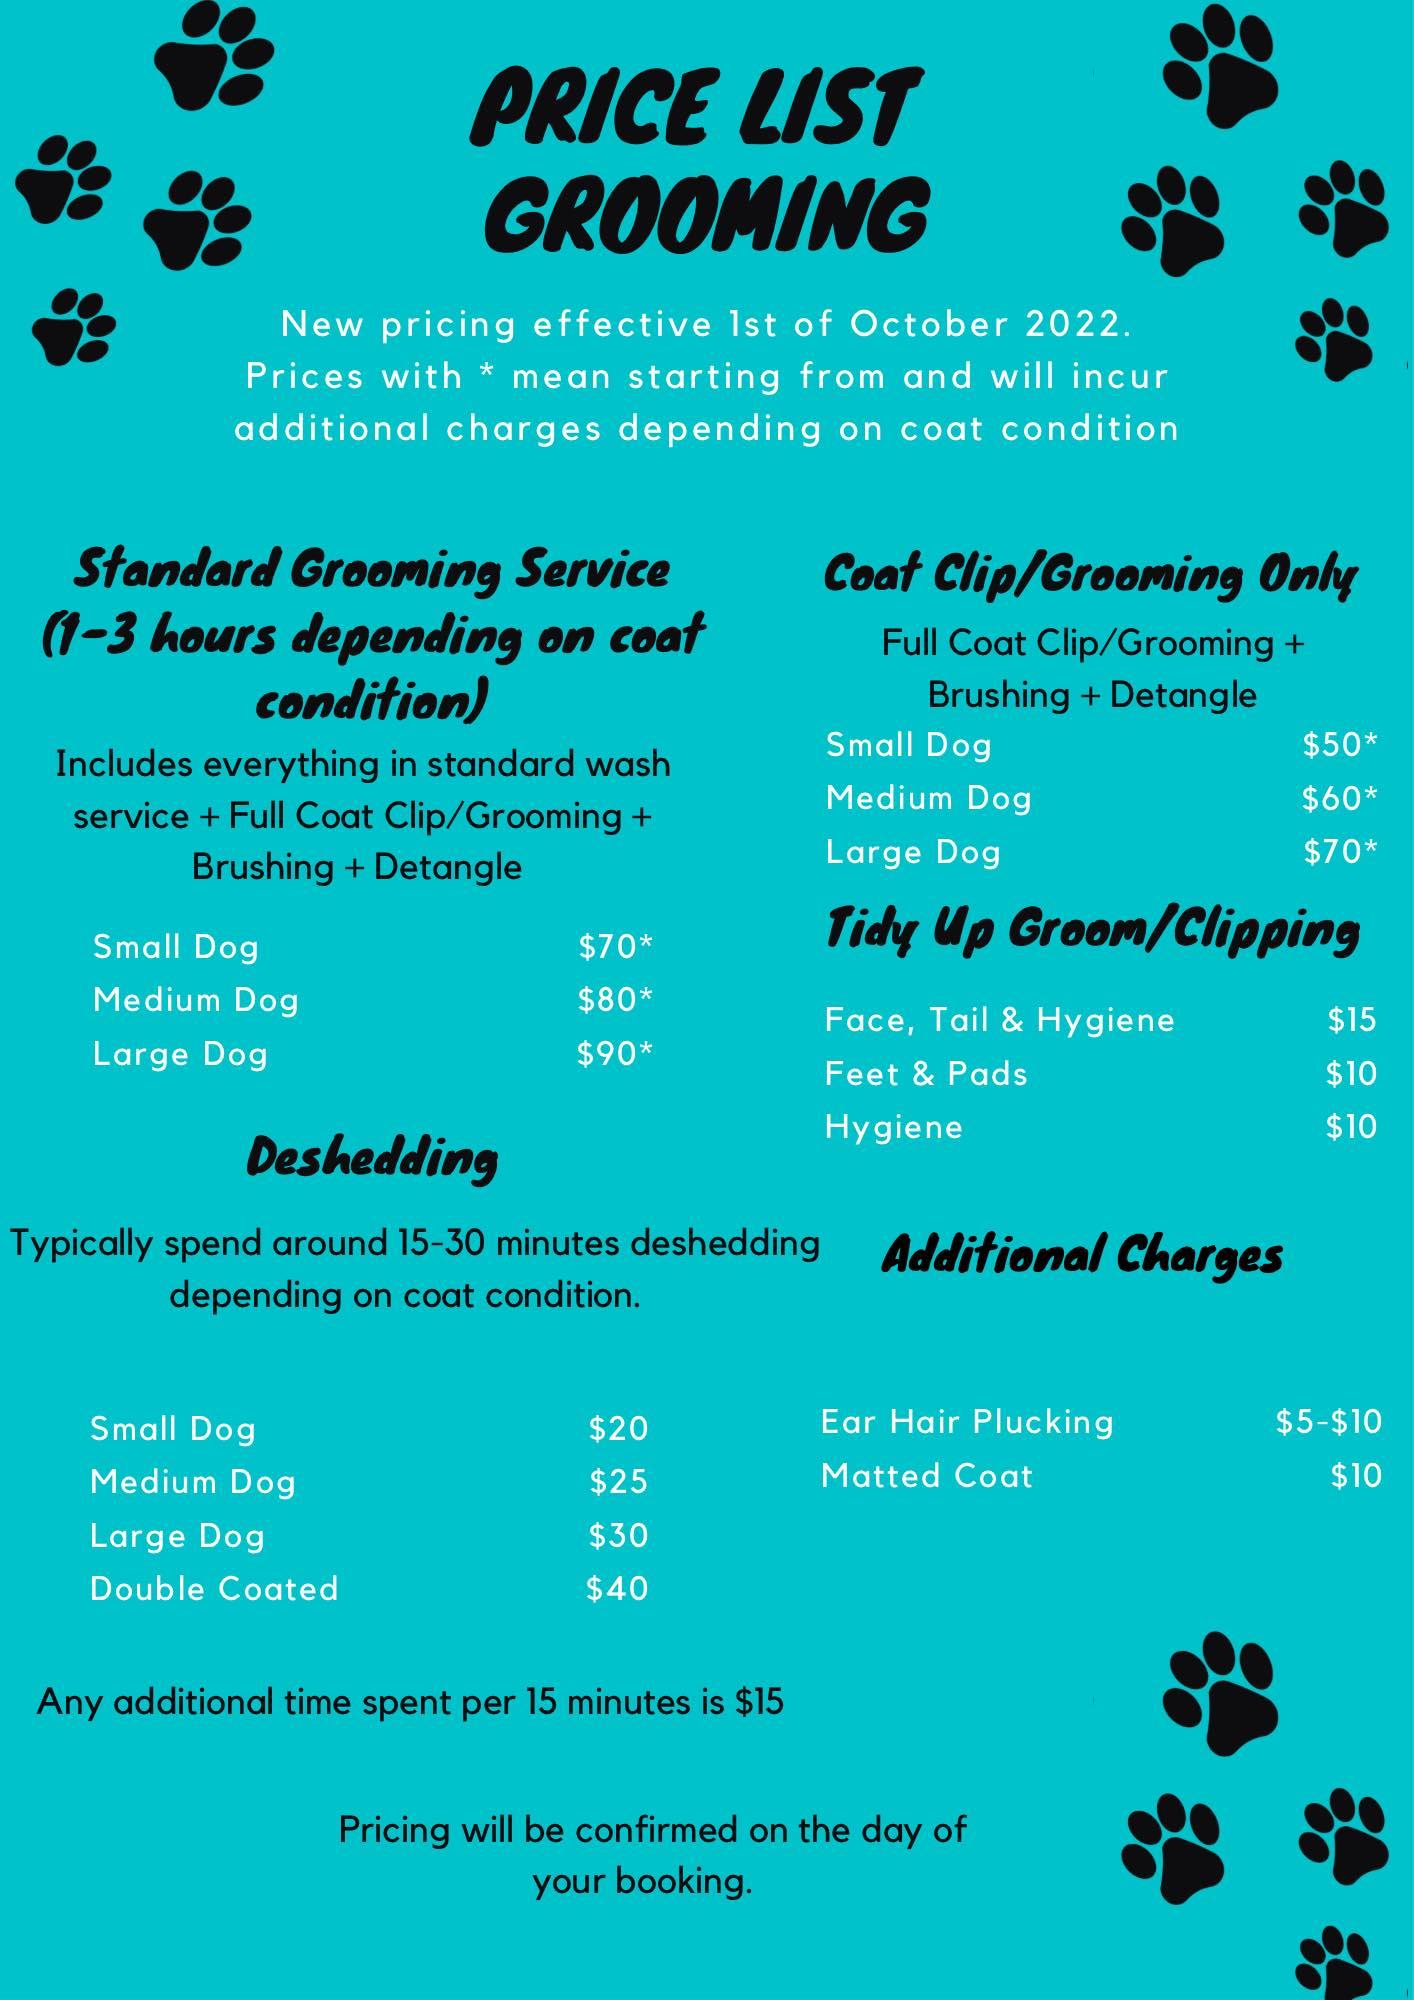 List of prices for grooming of dogs for all sizes.